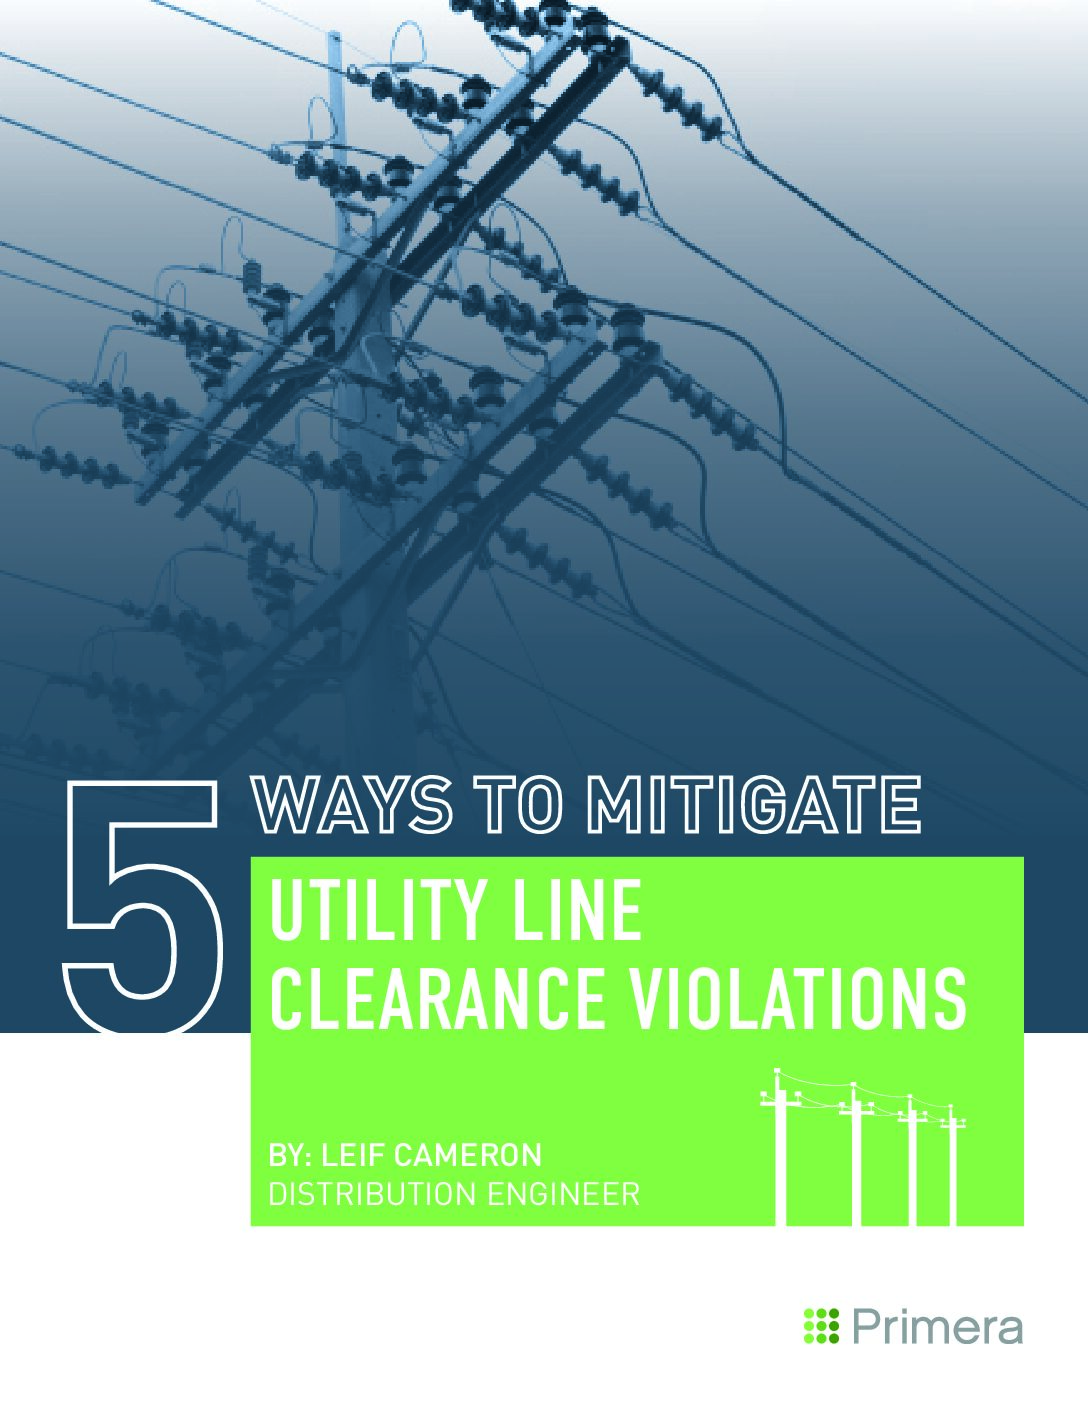 5 Ways to Mitigate UT Line Clearance Violations